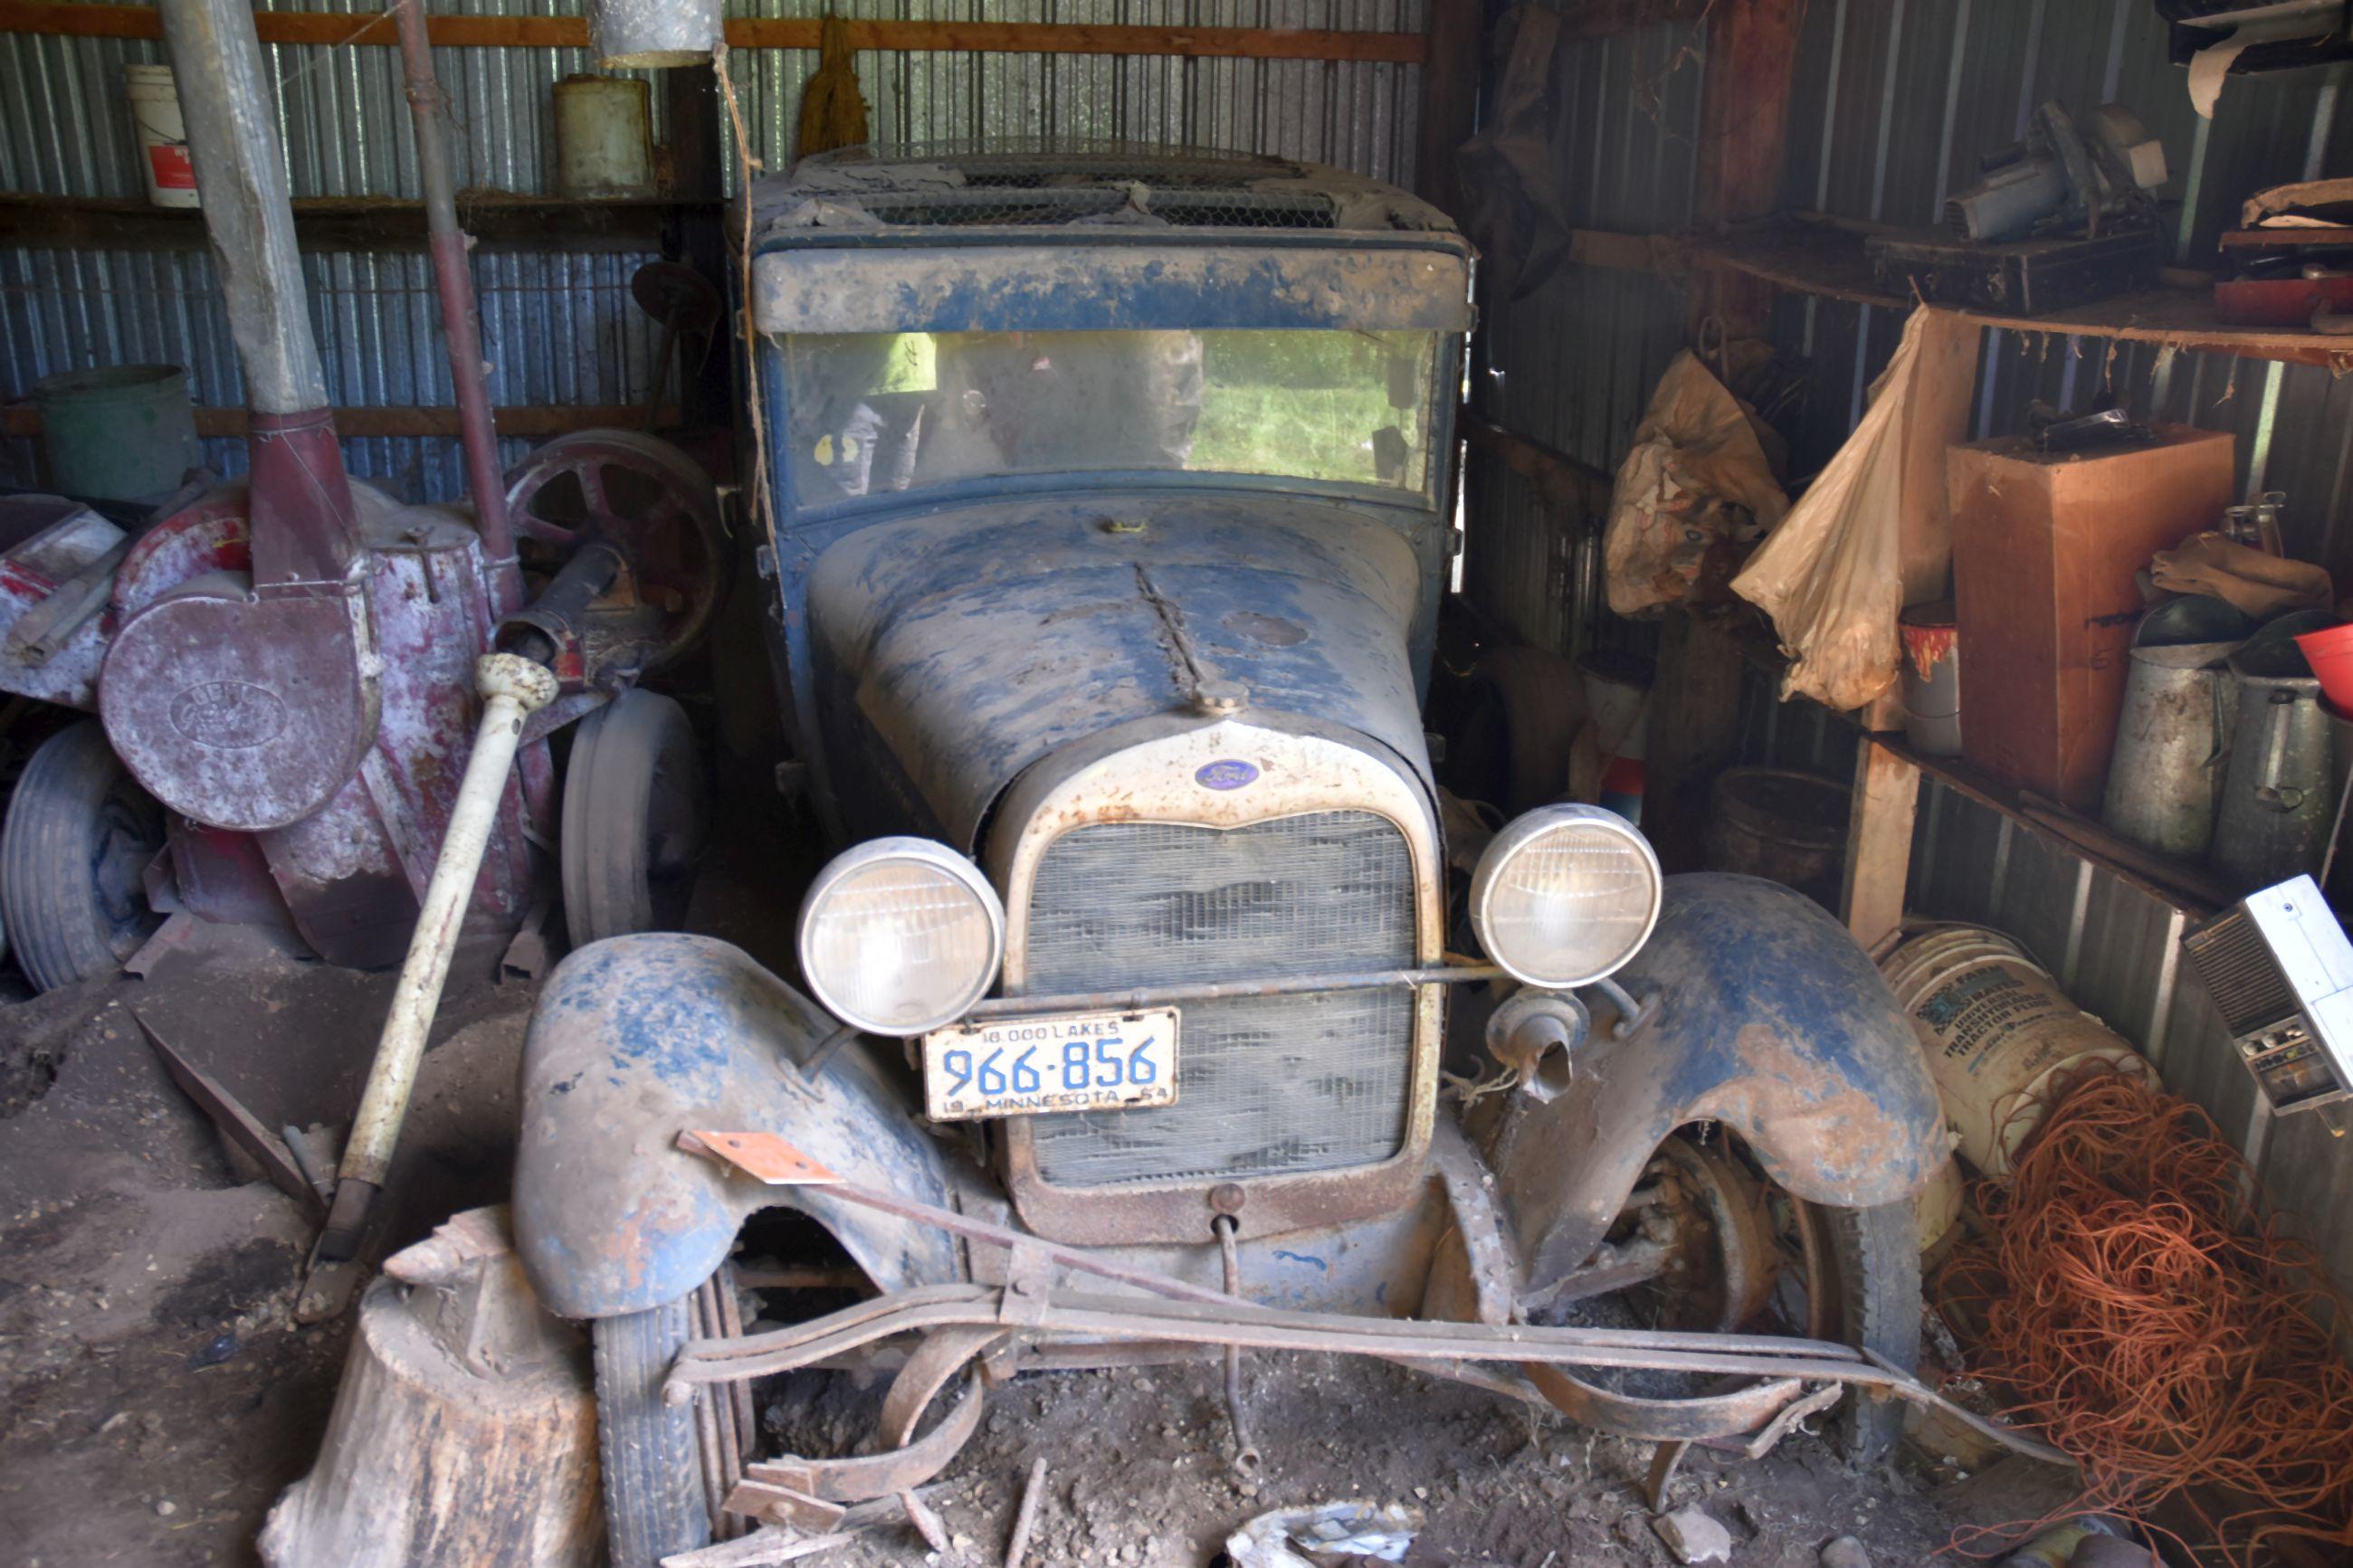 1929 Ford Model A, 2 Door Sedan, Poor Top,Non-Running, All Tires Are Bad, Has Been Sitting For Many